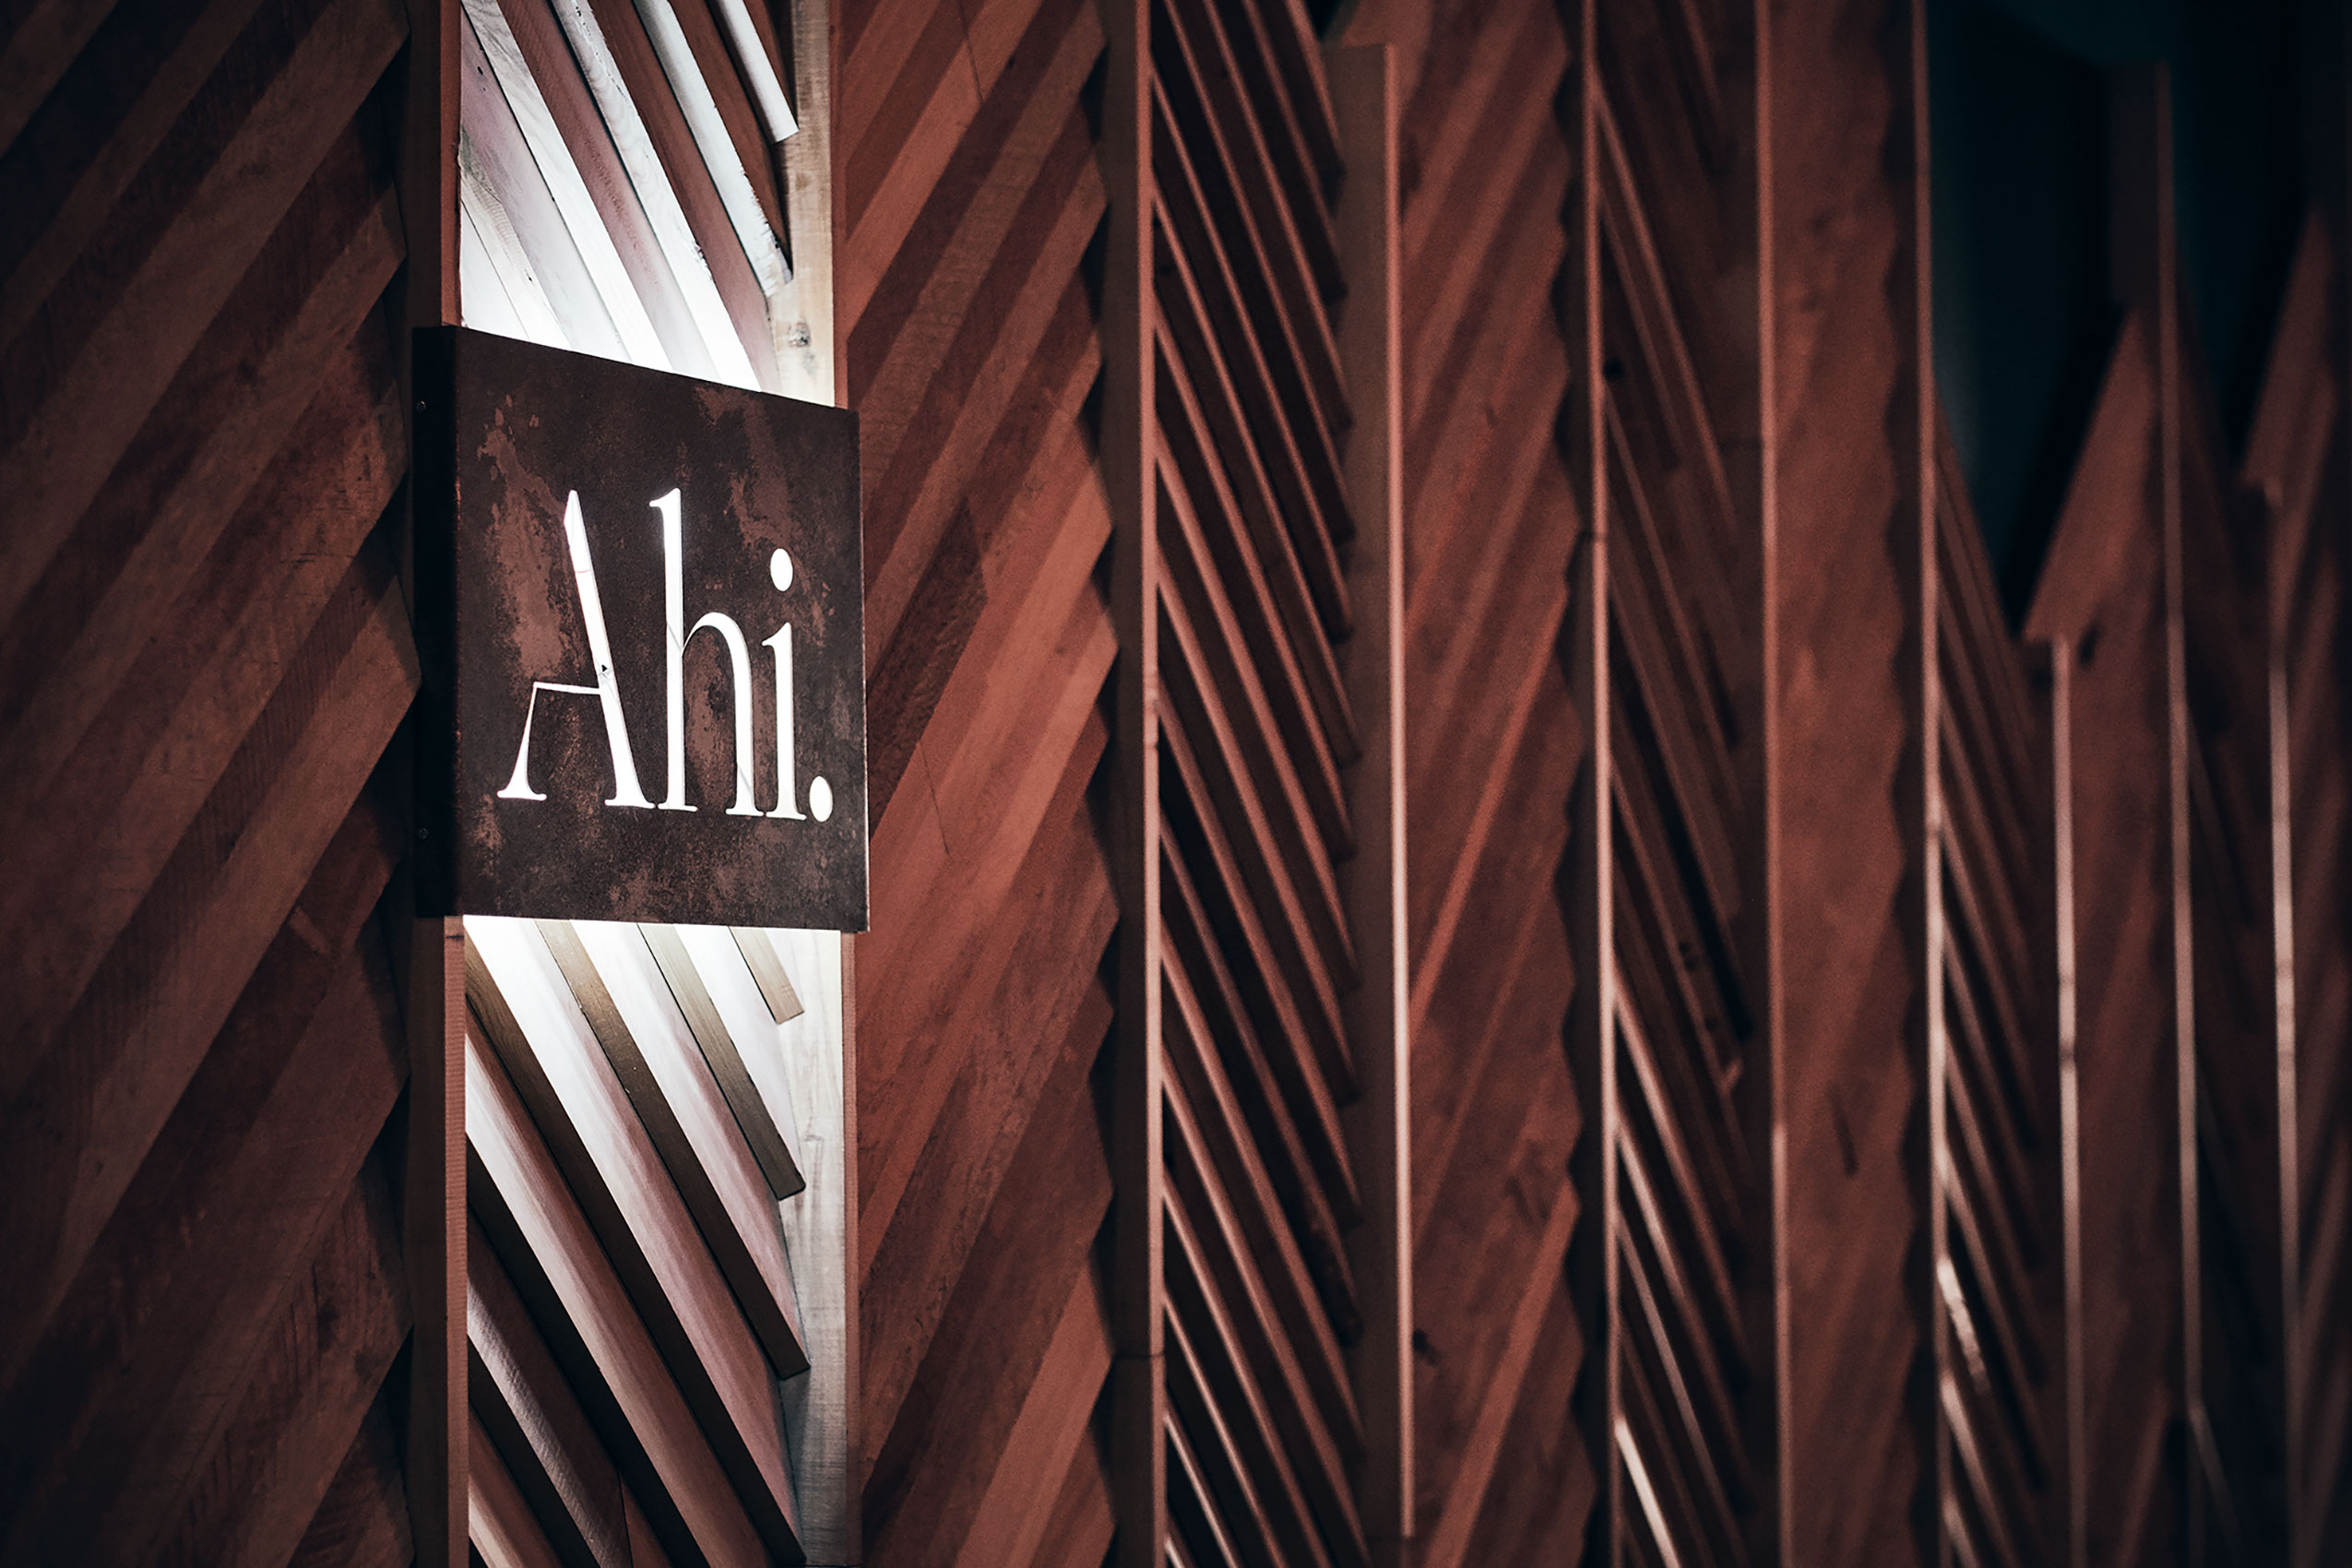 Ahi Logo Sign on Overlapping Wooden Boards • Hospitality & Culinary Food Photography